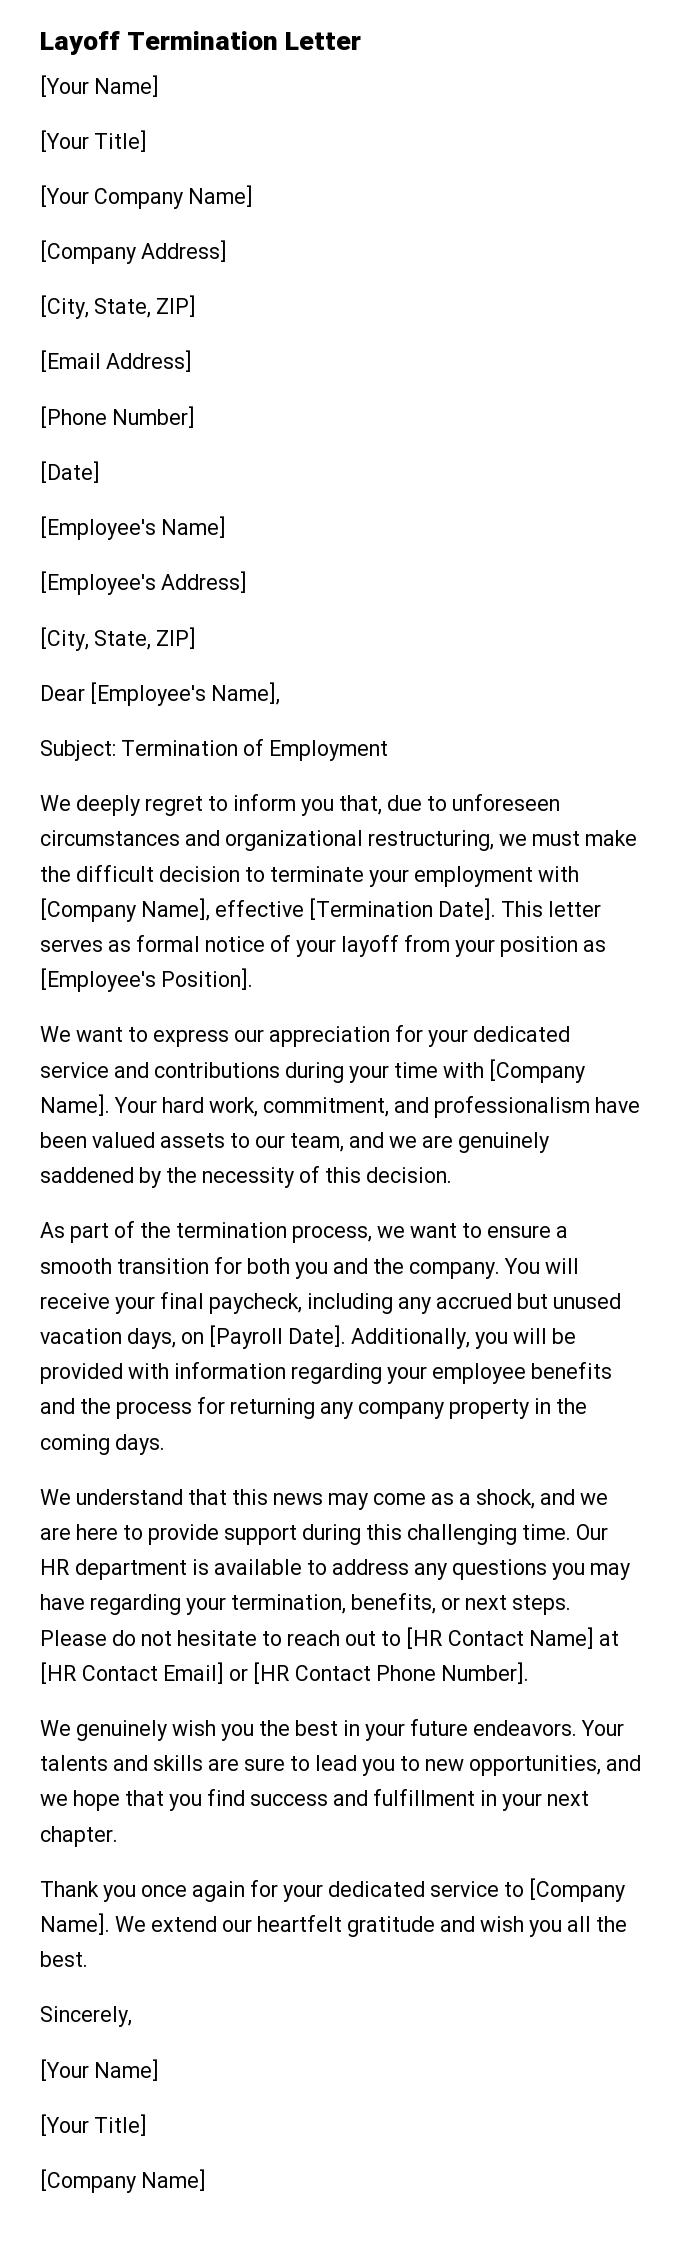 Layoff Termination Letter